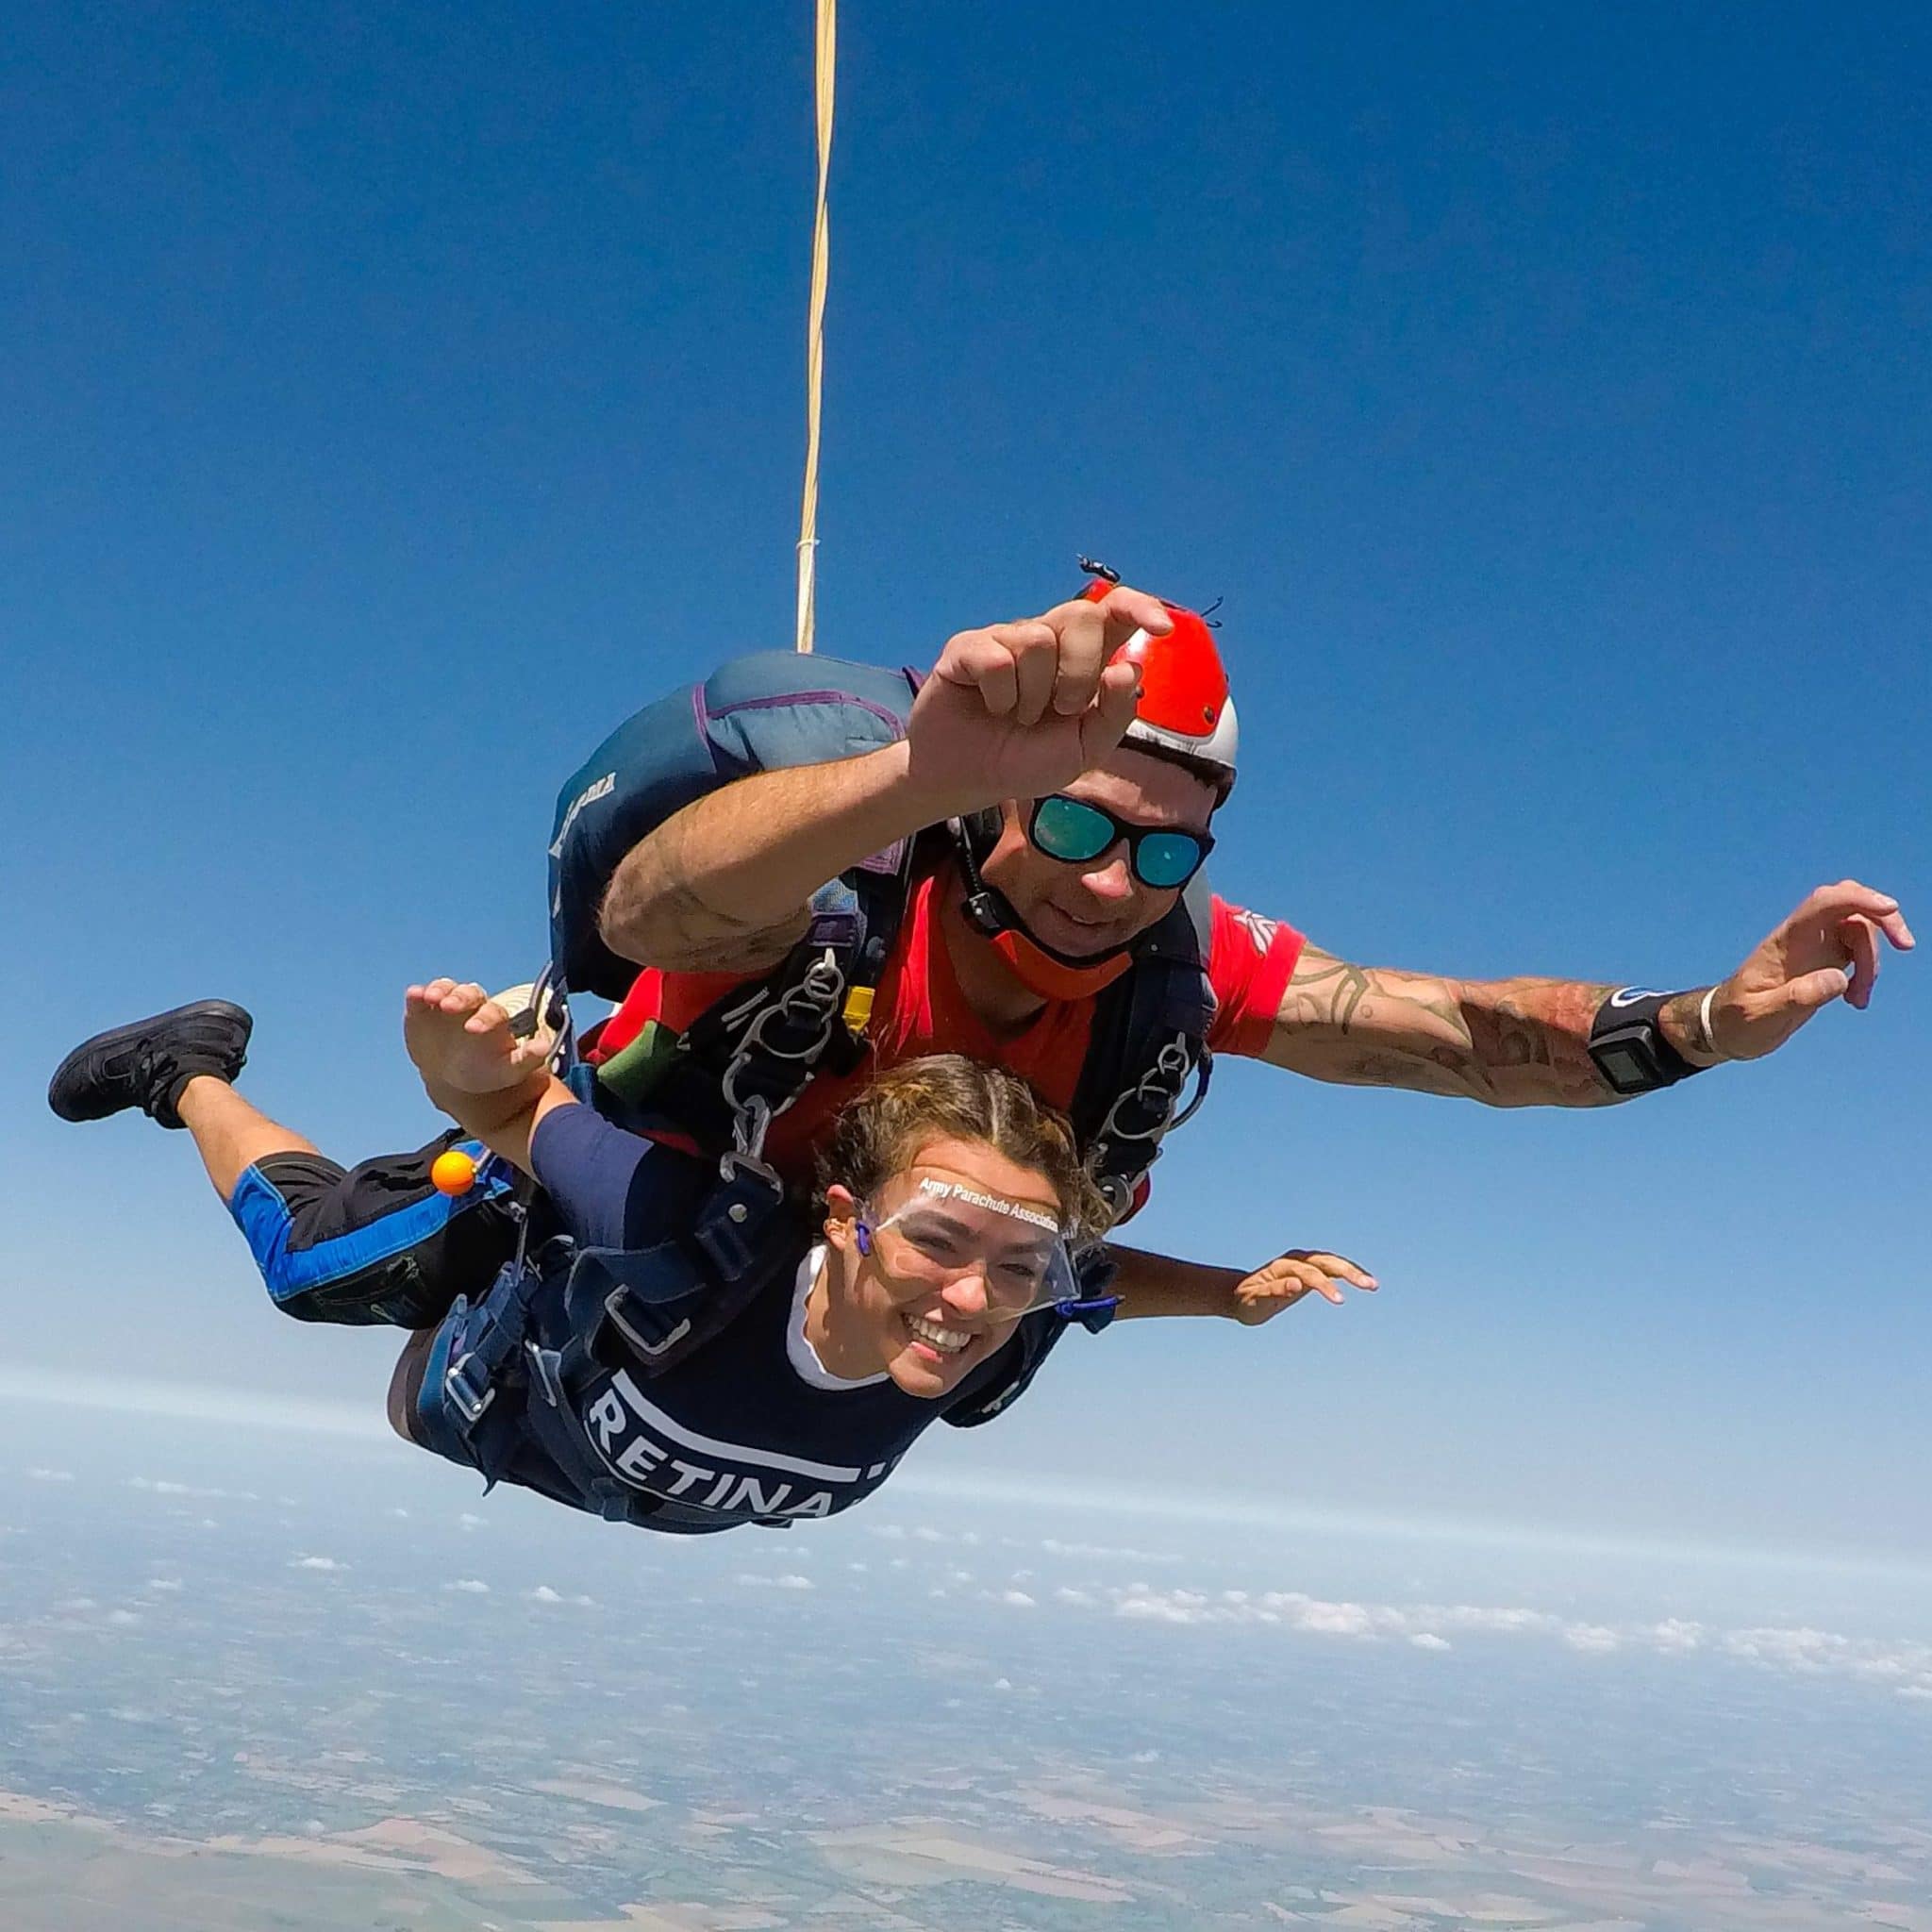 Image shows a Retina UK supporter with a skydive instructor freefalling in tandem. A blue sky is visible with clouds and the ground below.